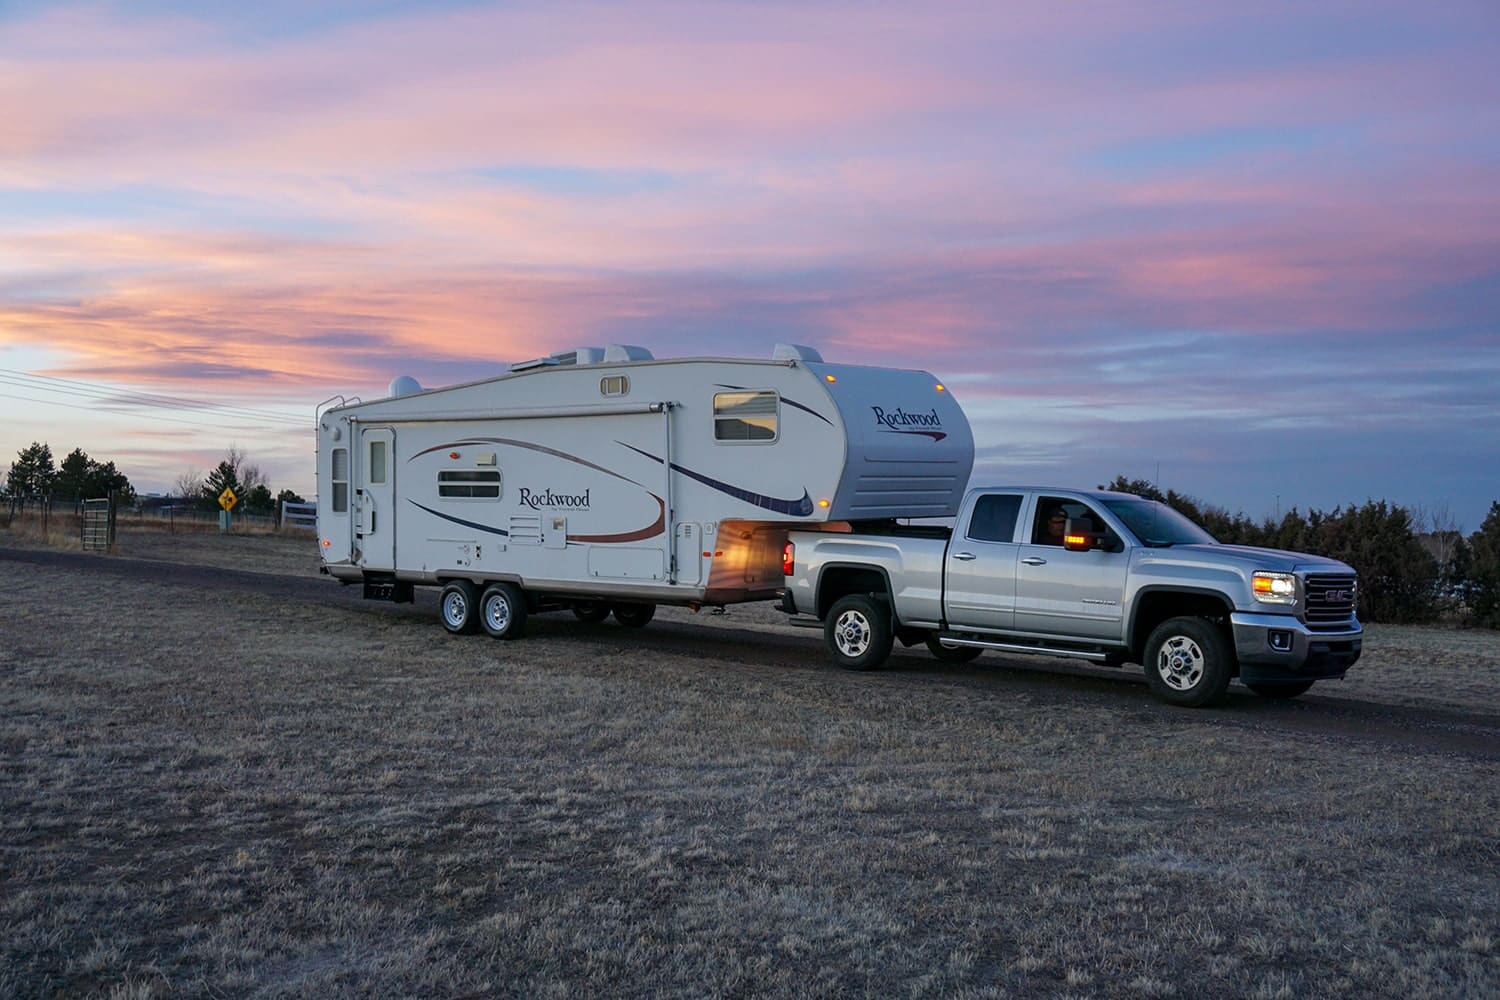 Do You Know Why It's Called A “Fifth Wheel” RV? - RV Talk How Much Does It Cost To Move A 5th Wheel